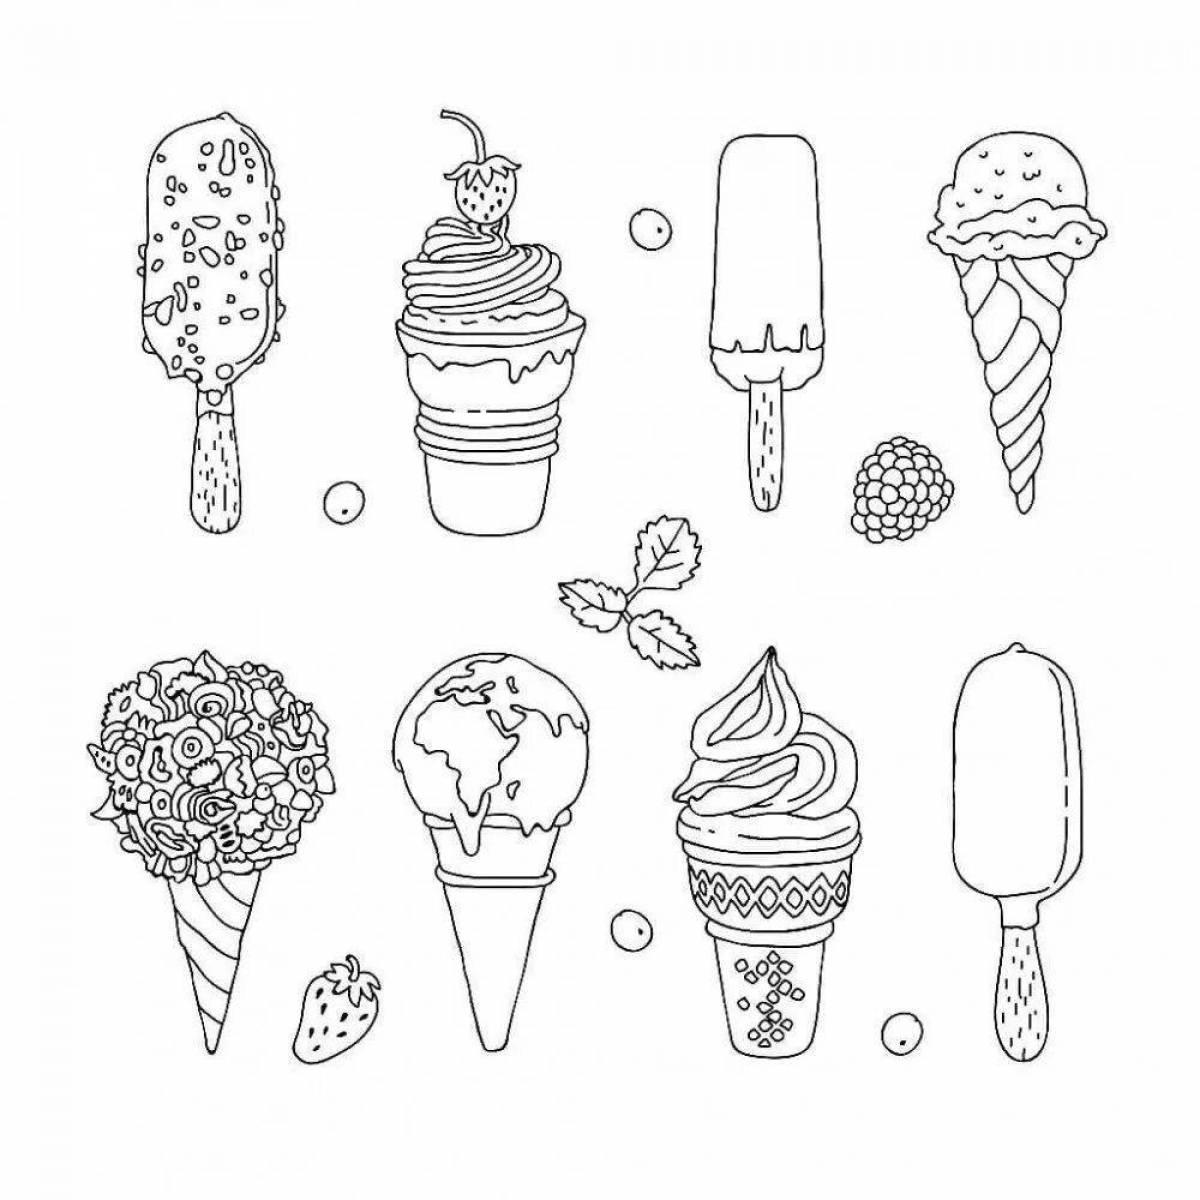 Friendly popsicle coloring page